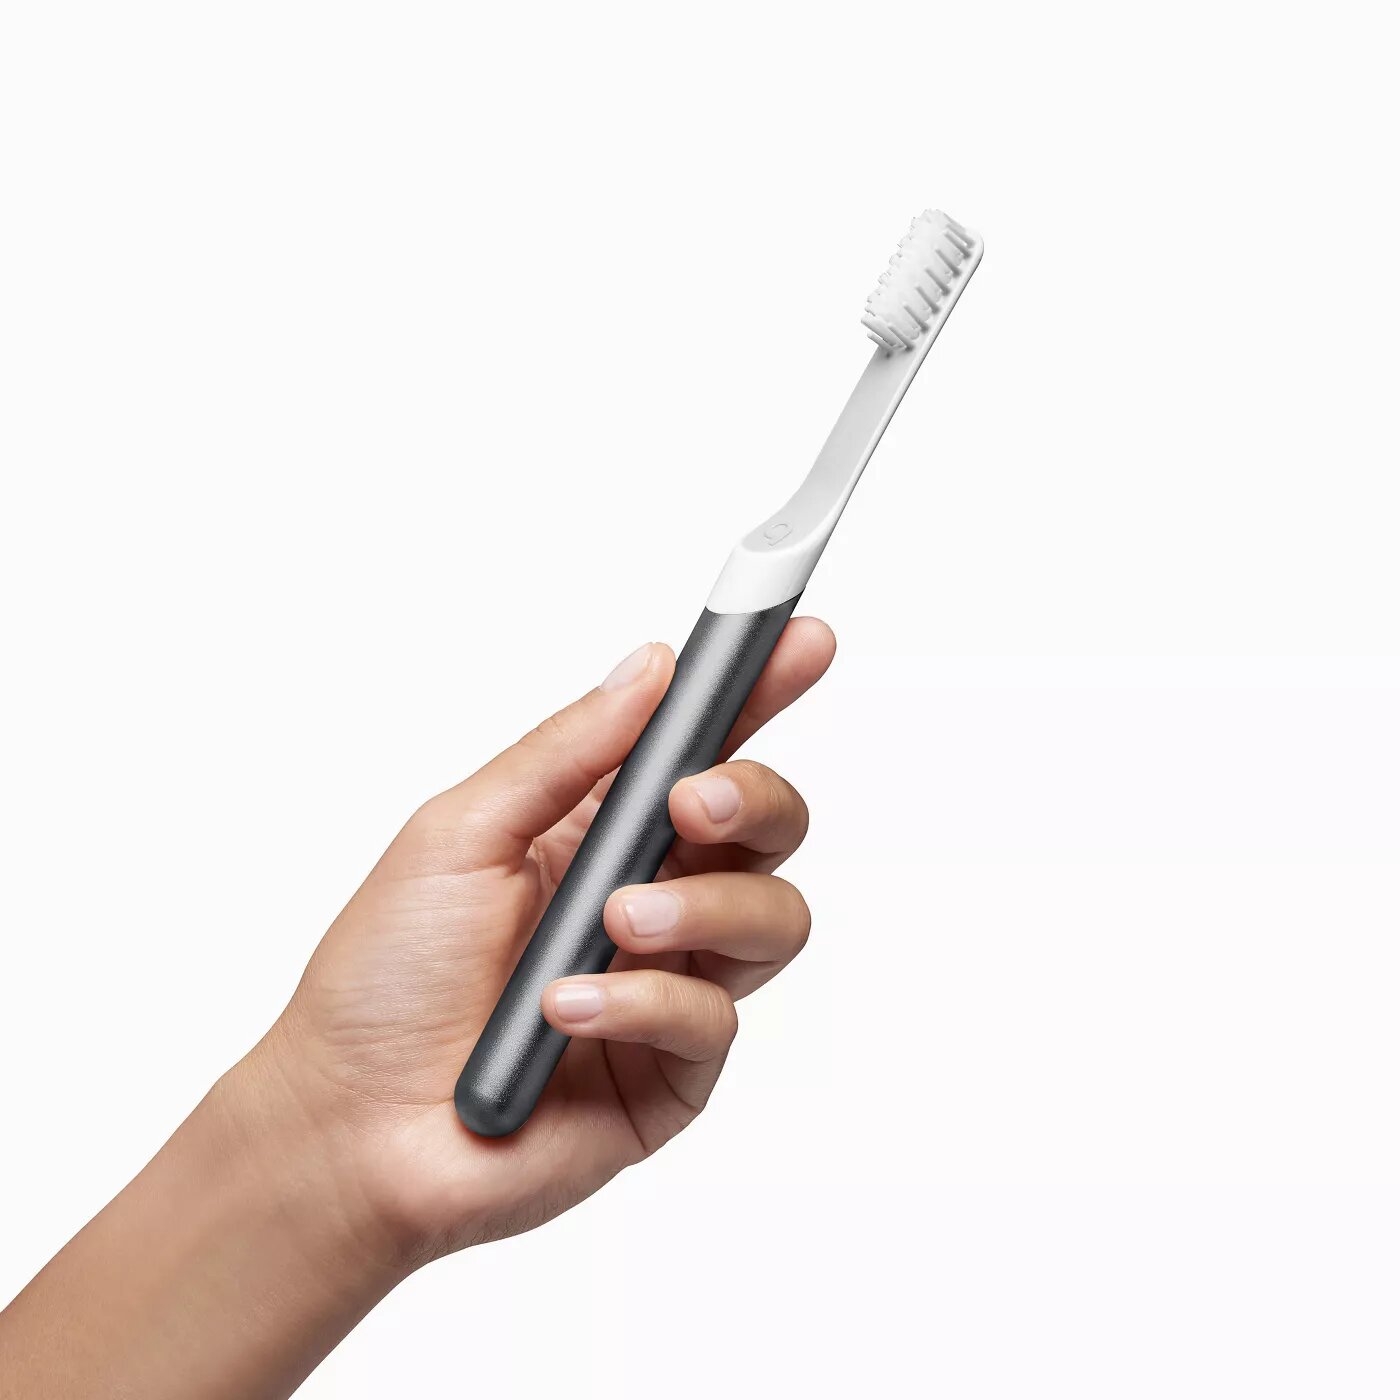 quip Electric Toothbrush, Built-In Timer + Travel Case, Slate Metal - image 5 of 6